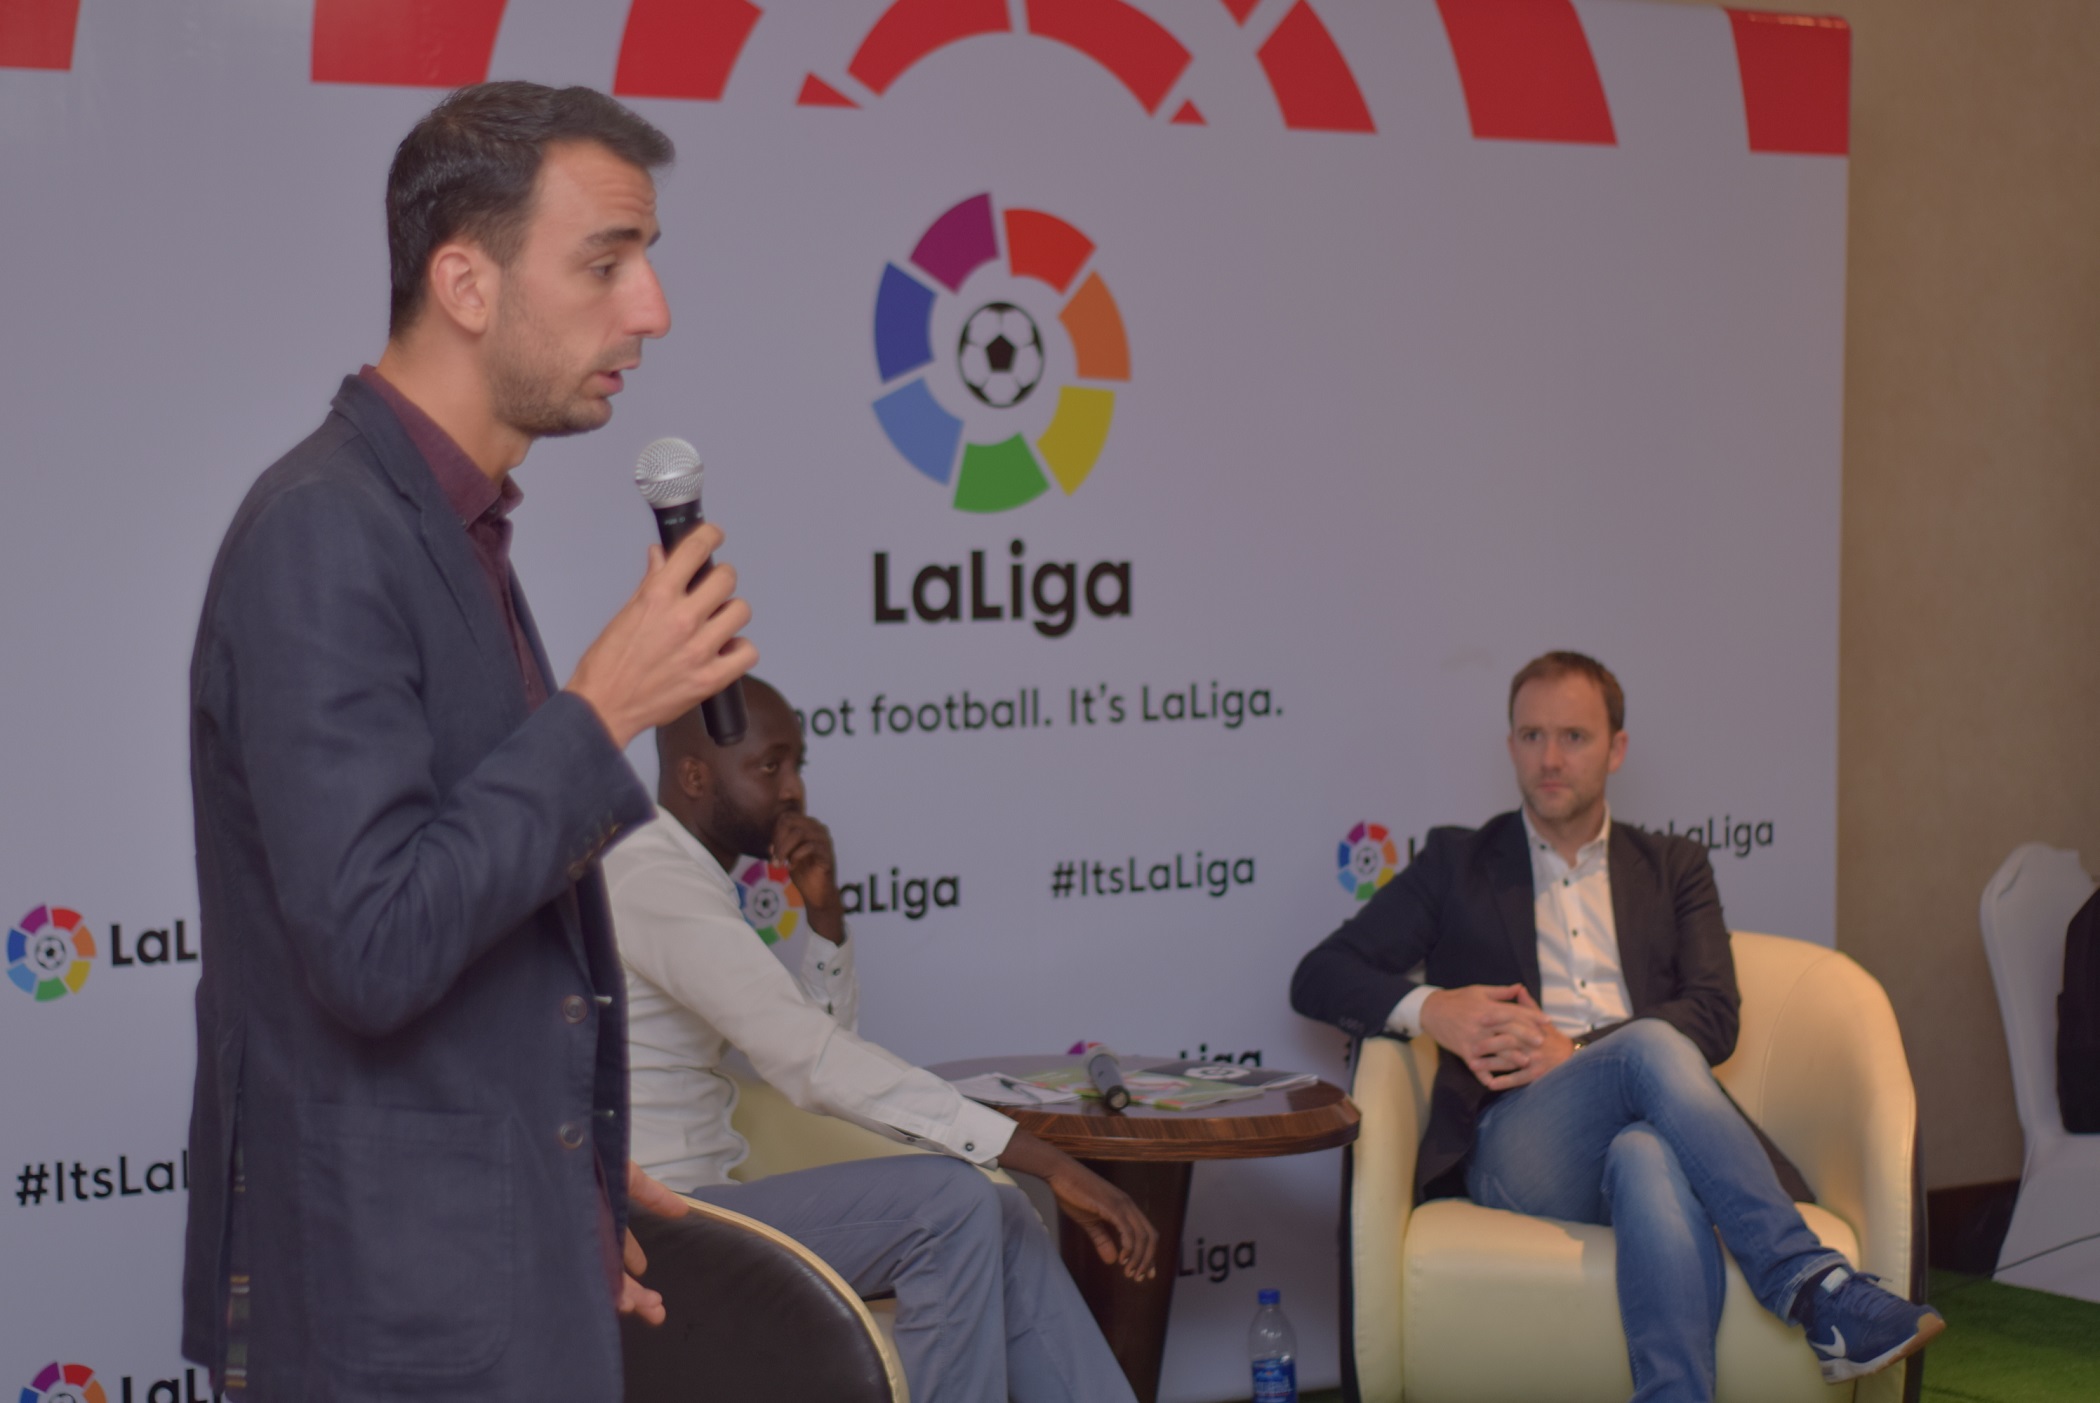 Discovering The Passion of LaLiga With Sid Lowe